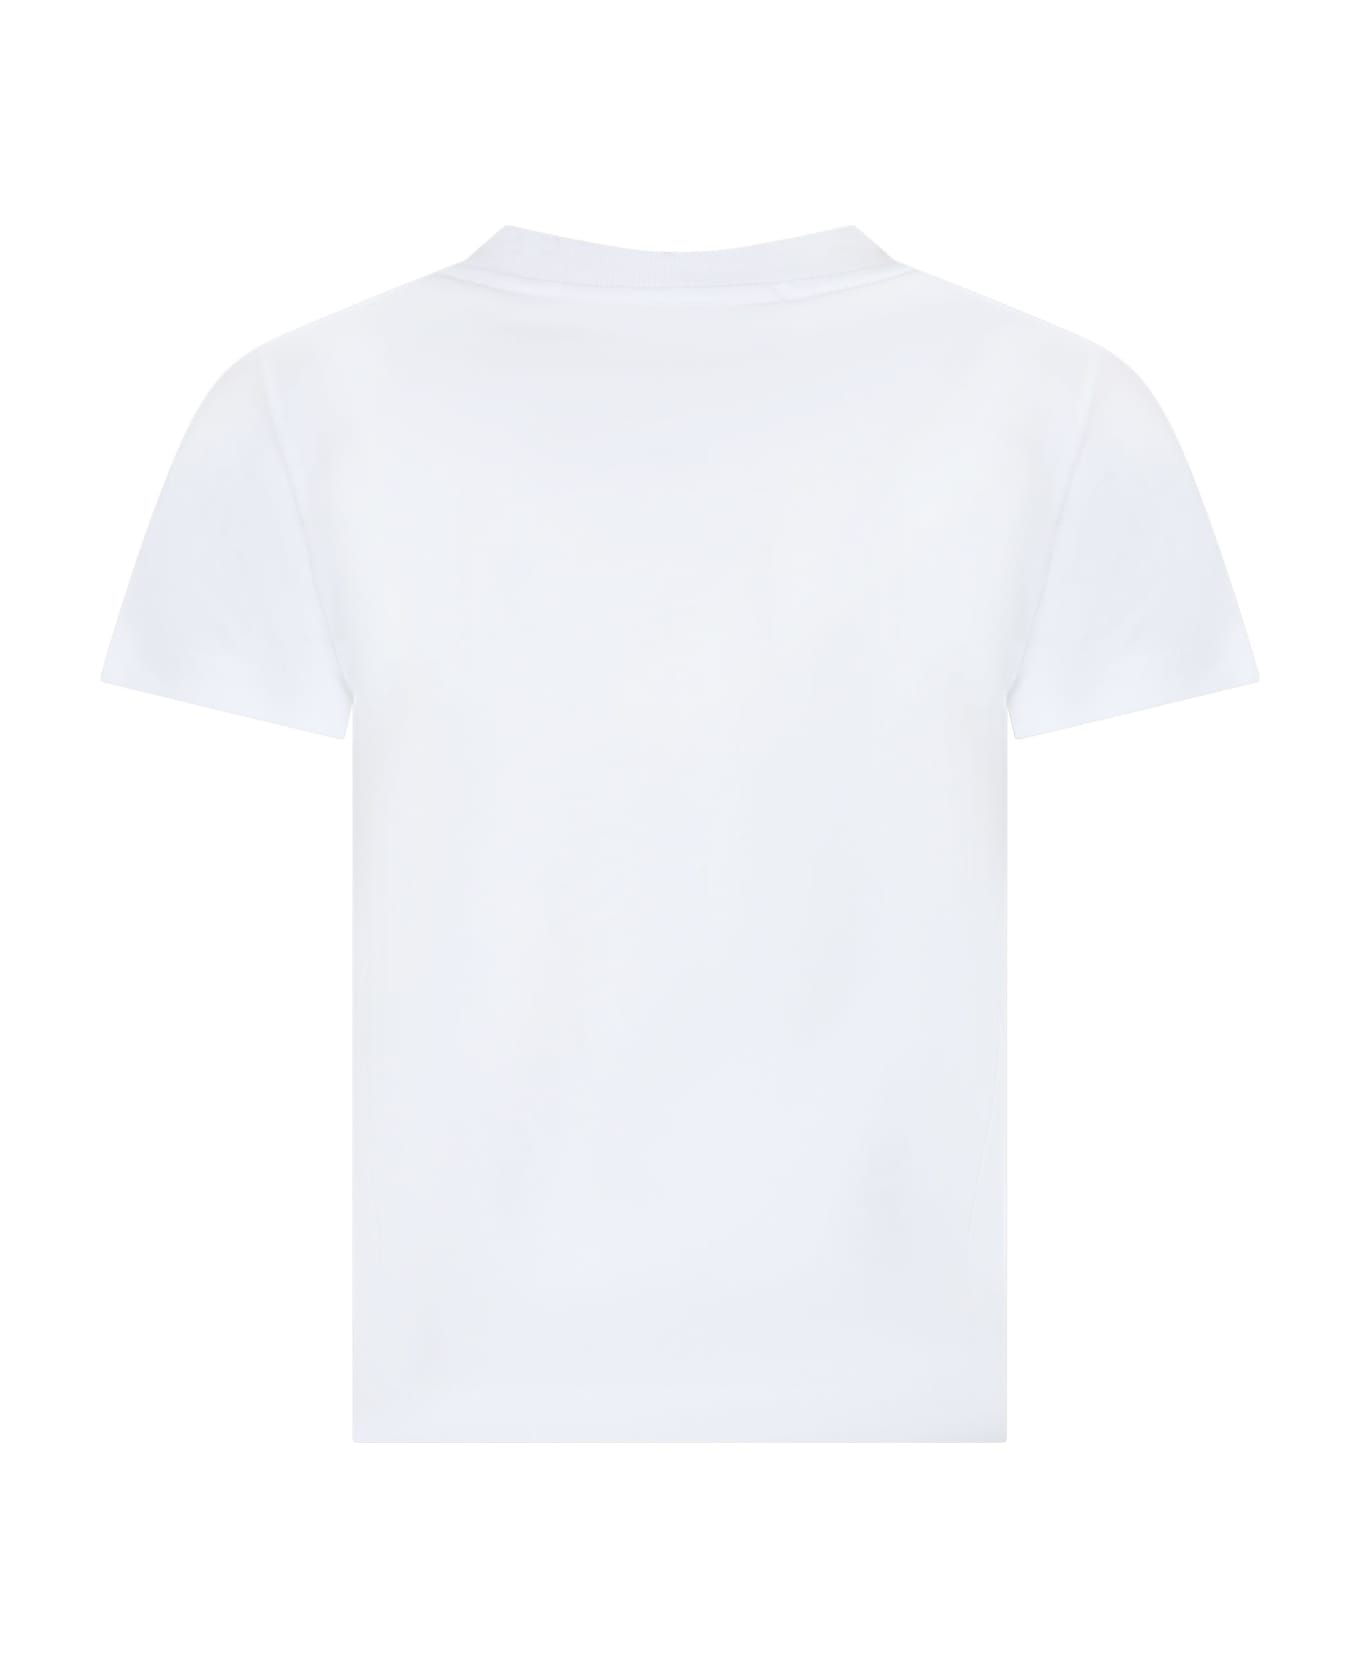 Alessandro Enriquez White T-shirt For Girl With Mermaid Print And Writing - White